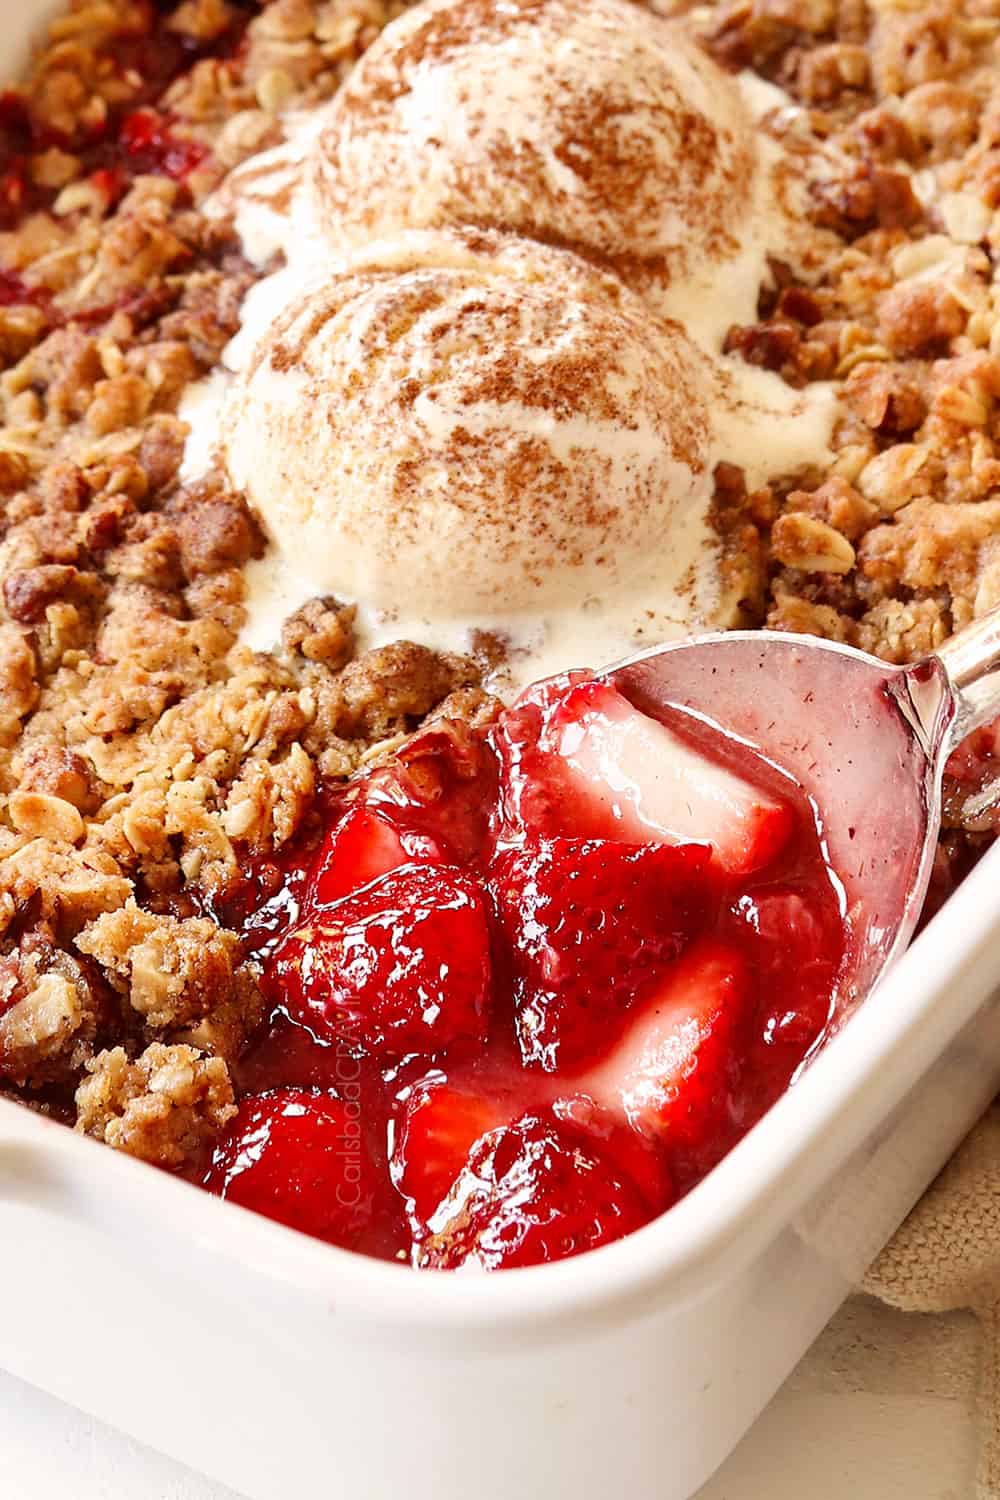 up close of a spoonful of strawberry crumble (crisp) showing the juicy strawberry filling